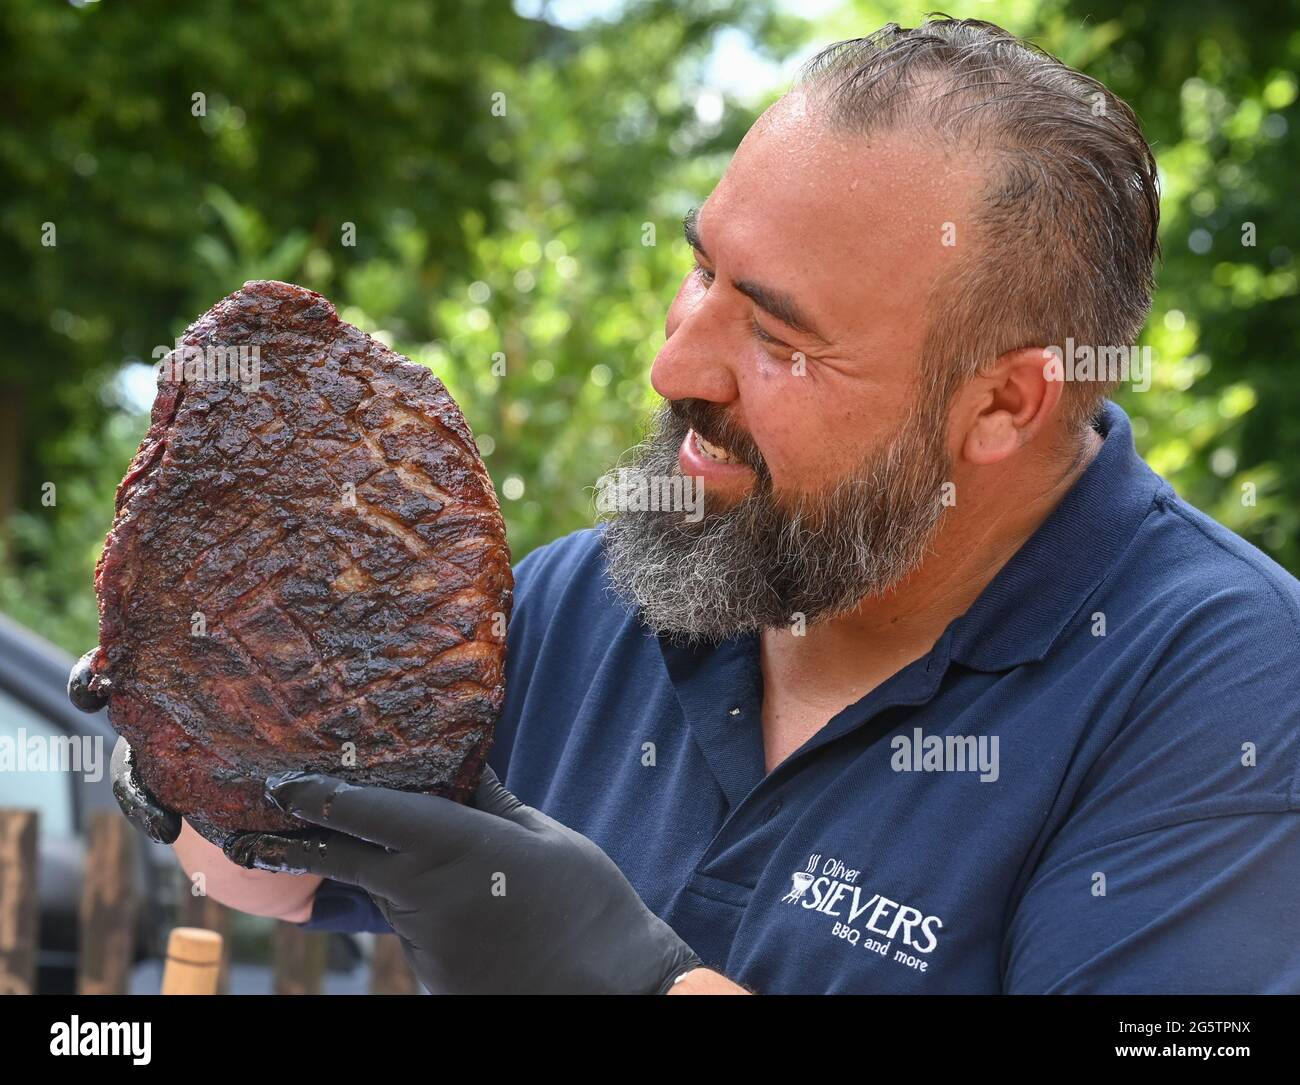 21 June 2021, Brandenburg, Lübben: Oliver Sievers, grill world champion,  shows a piece of beef prepared as Tafelspitz in the oven and grill. Photo:  Patrick Pleul/dpa-Zentralbild/ZB Stock Photo - Alamy